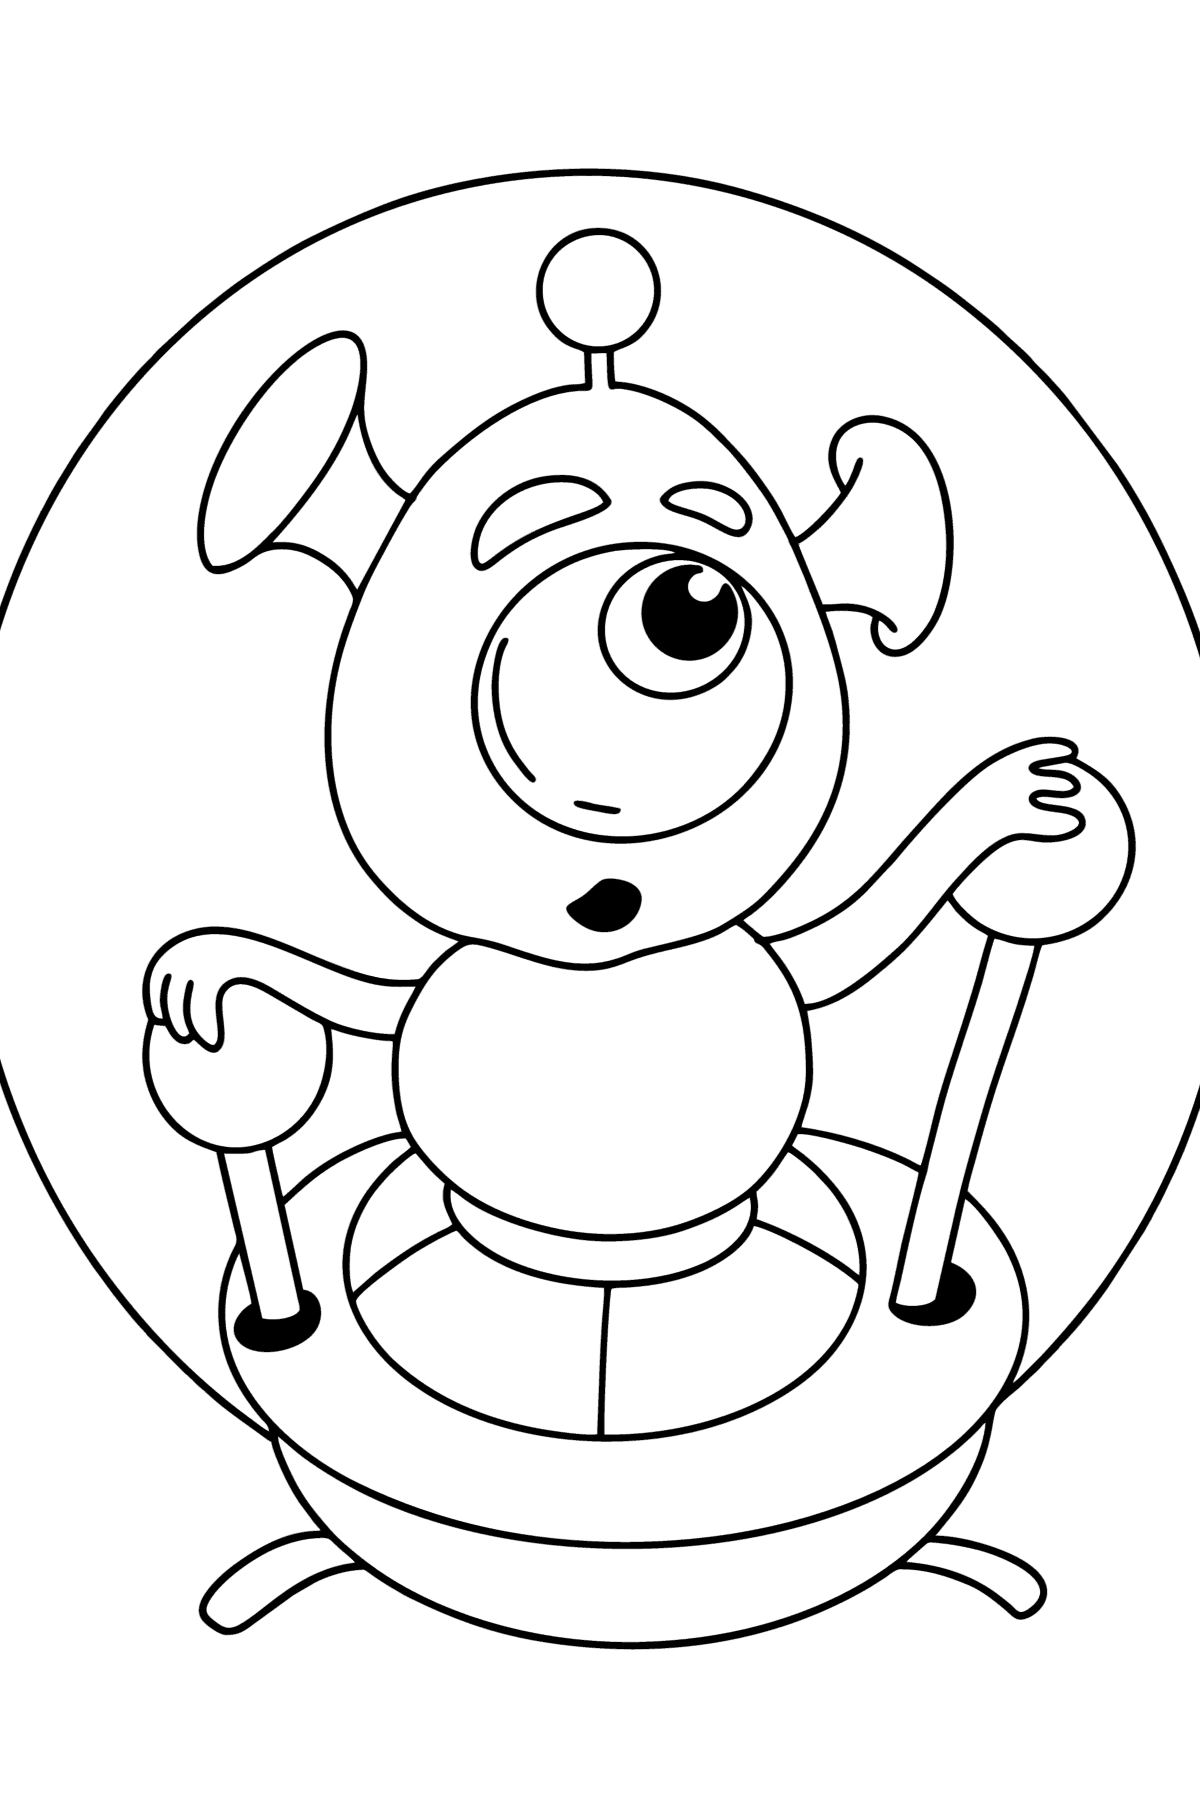 Baby Alien coloring pages - Coloring Pages for Kids